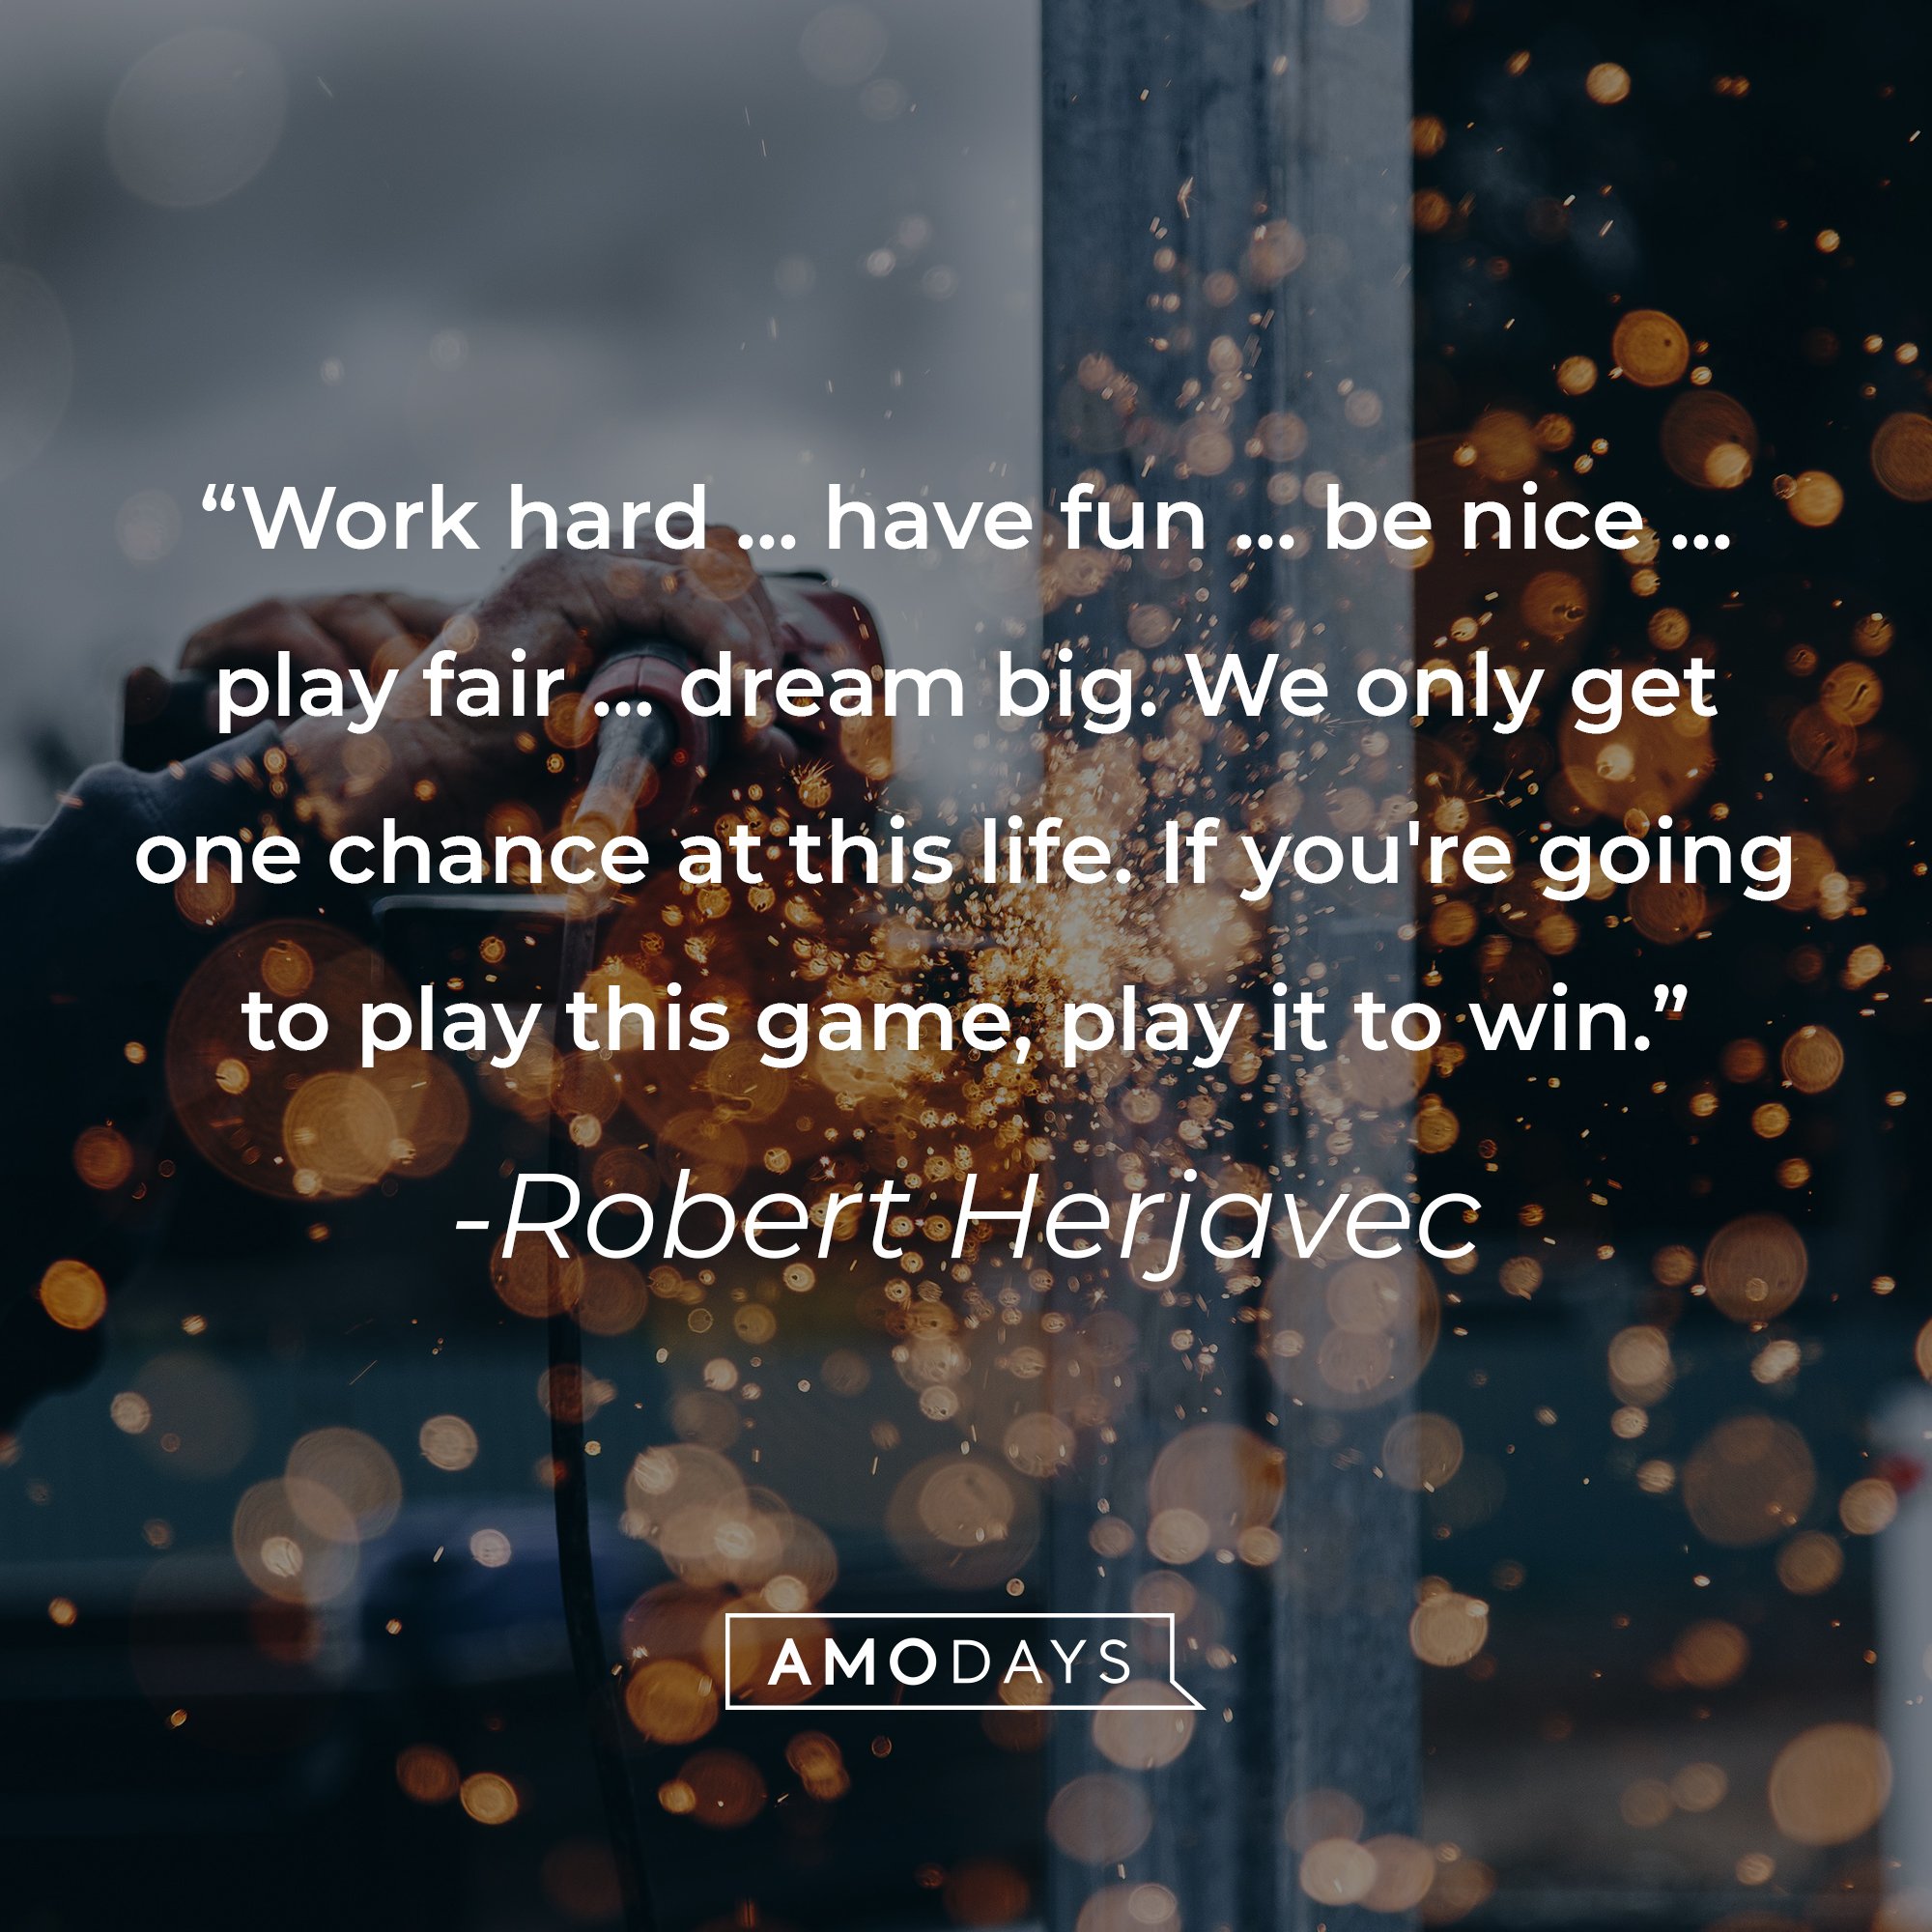 Robert Herjavec's quote: "Work hard ... have fun ... be nice ... play fair ... dream big. We only get one chance at this life. If you're going to play this game, play it to win." | Image: AmoDays